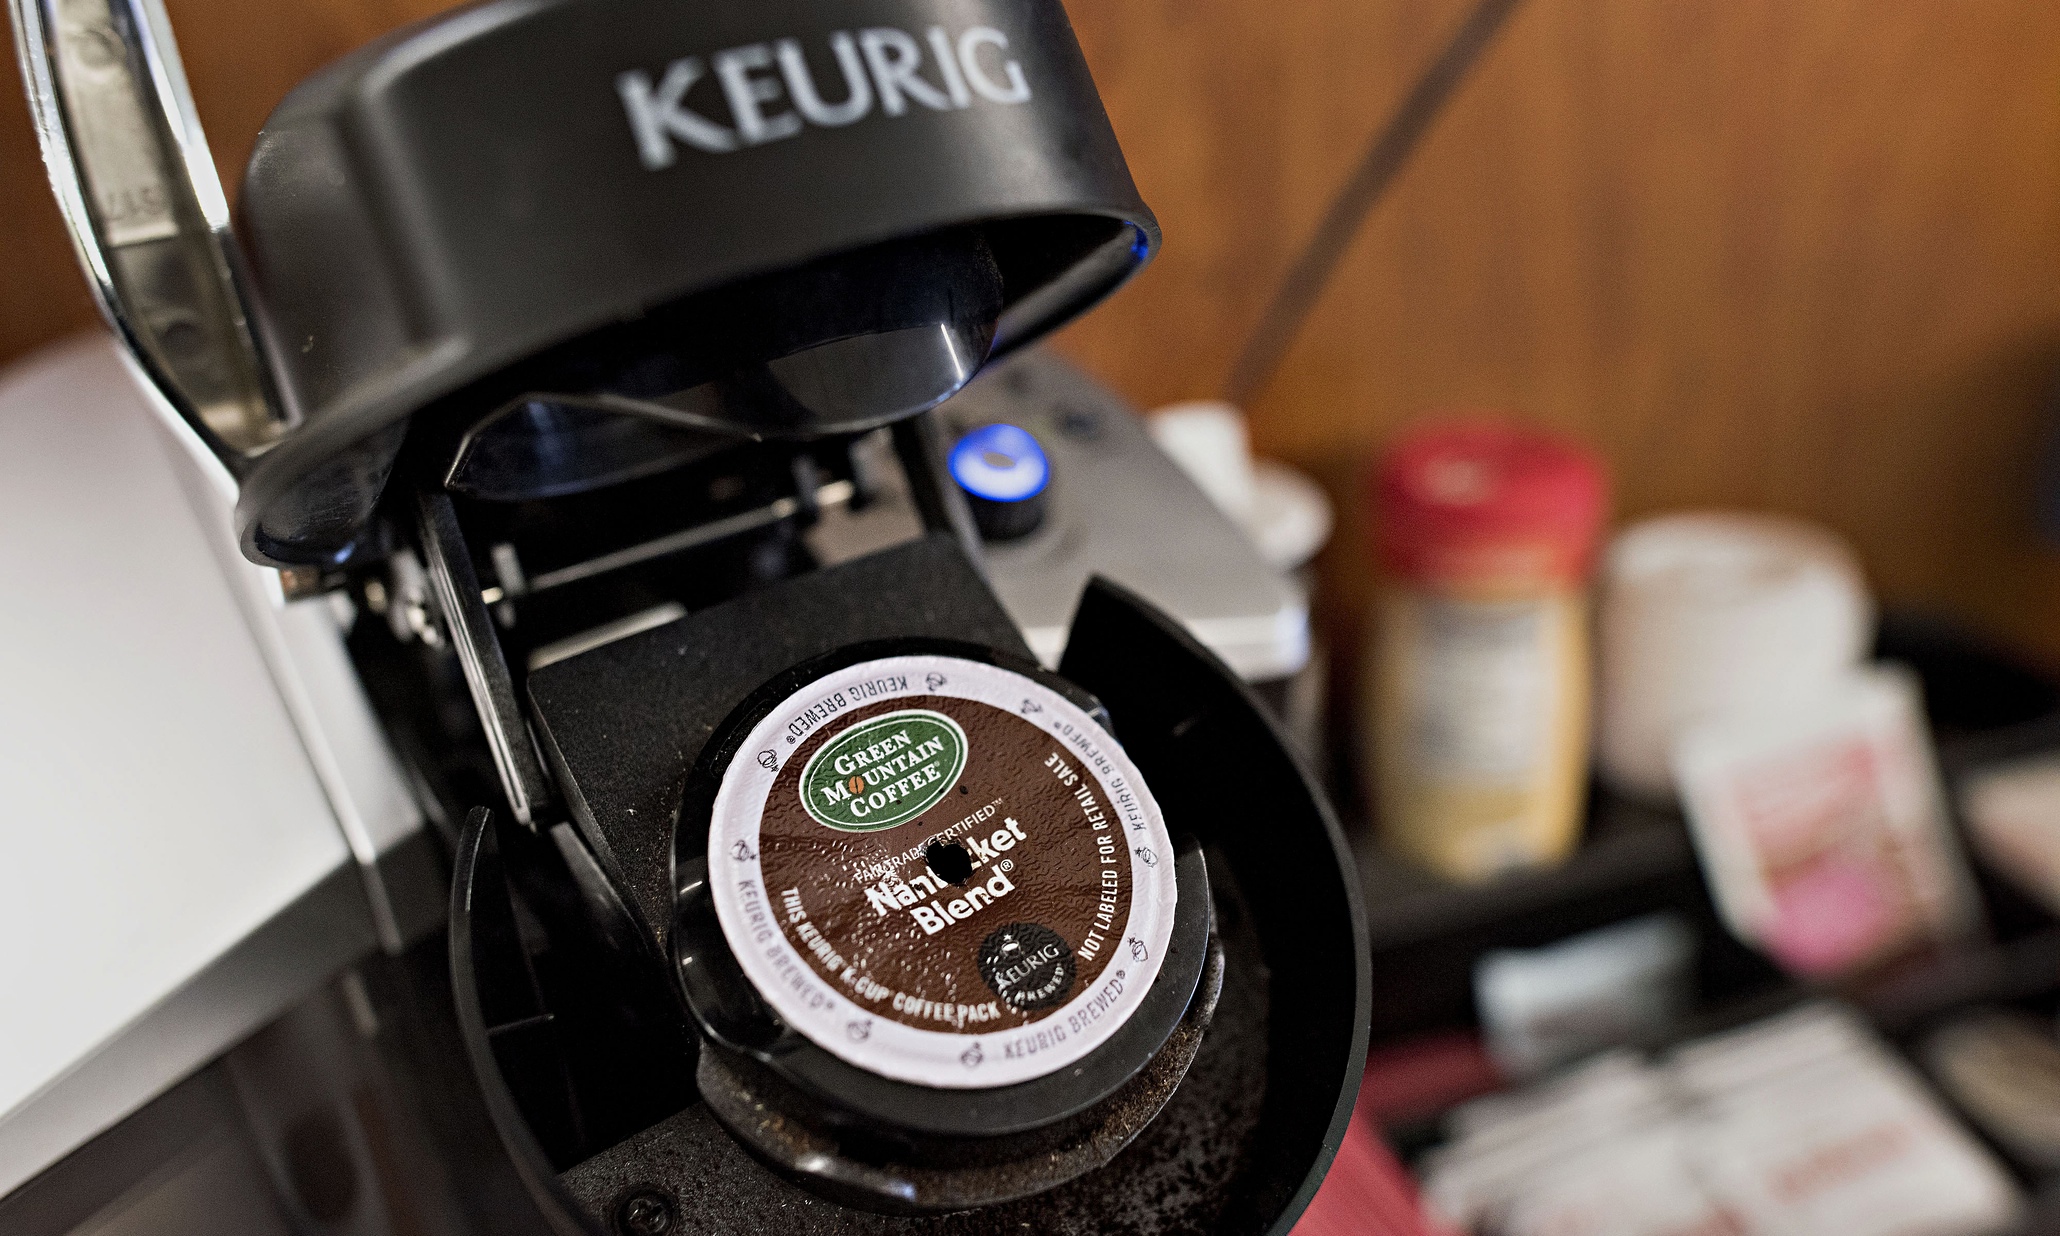 Why The Man Behind Keurig’s Coffee Pods Wishes He’d Never Invented Them